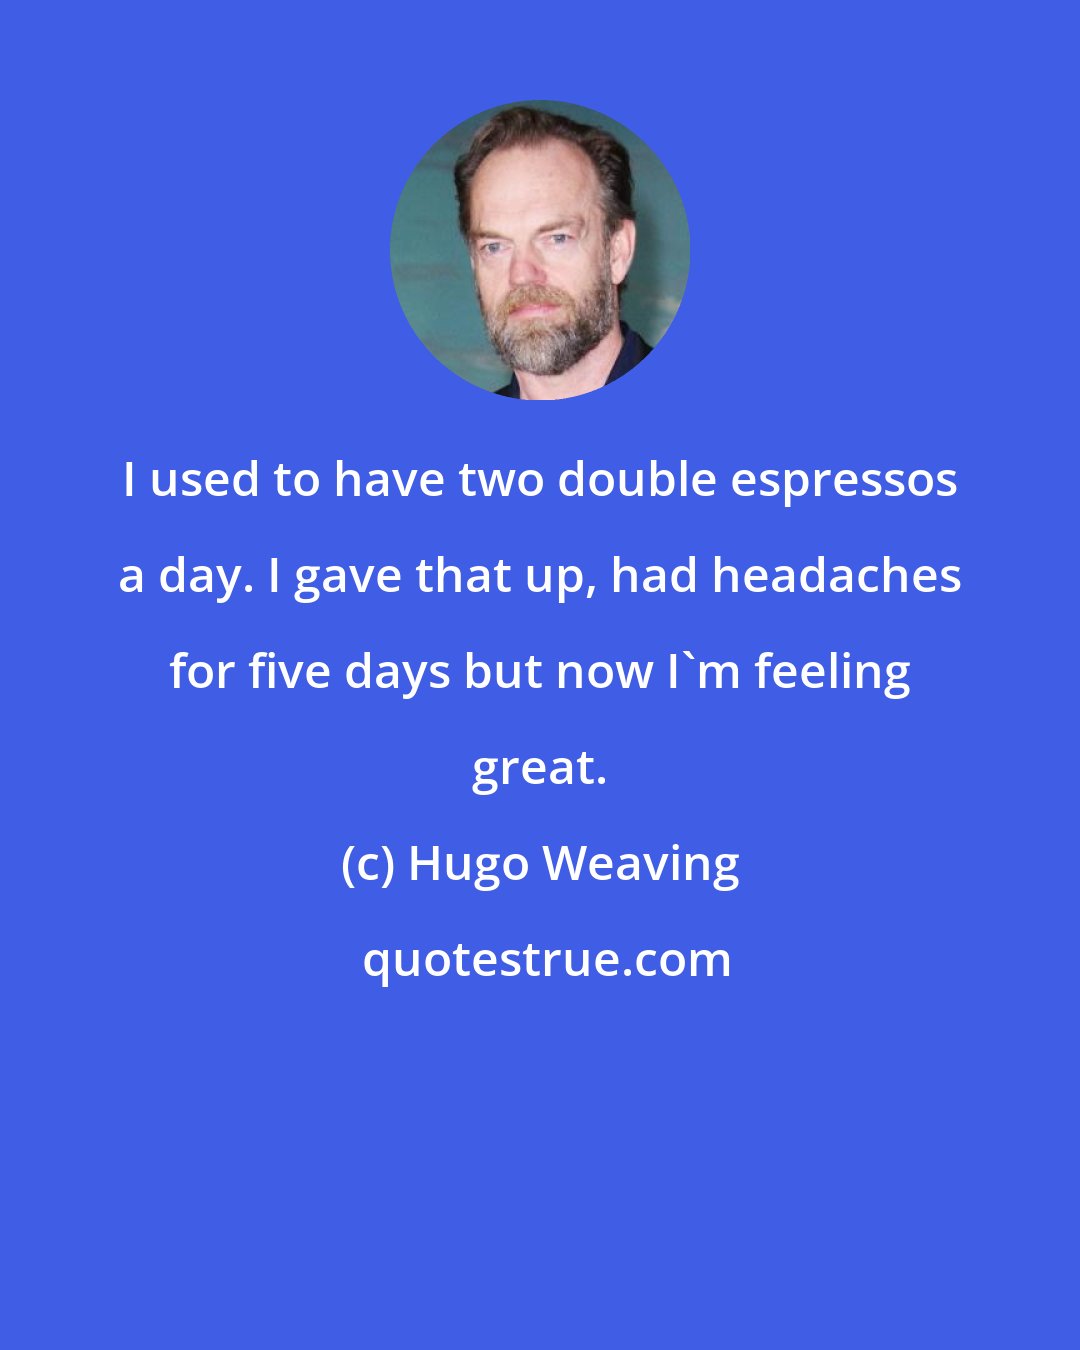 Hugo Weaving: I used to have two double espressos a day. I gave that up, had headaches for five days but now I'm feeling great.